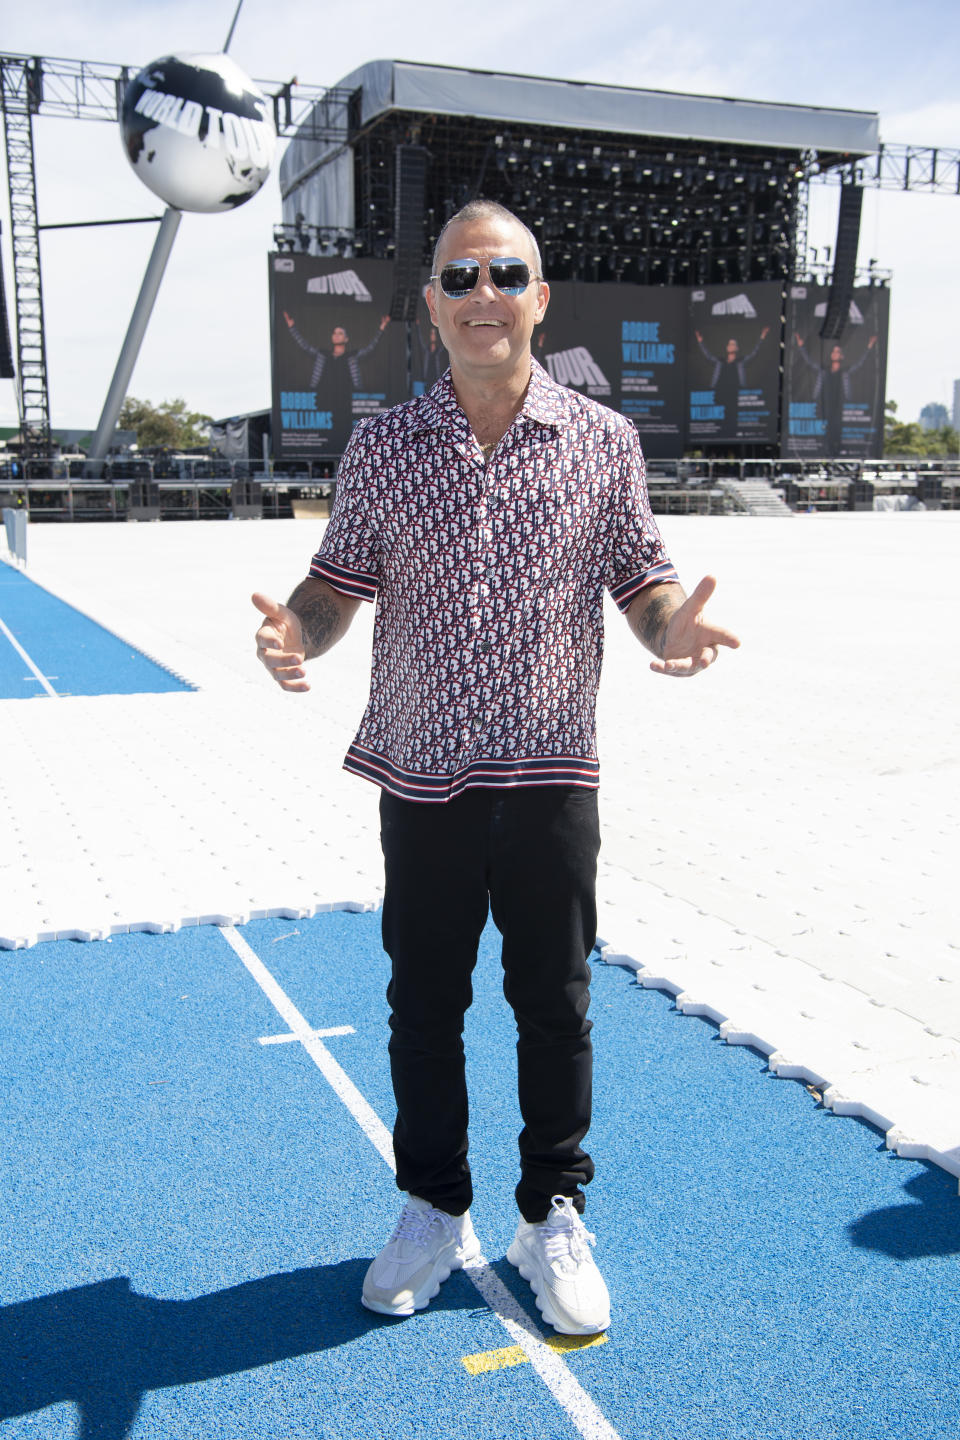 Robbie Williams attends a media call on March 12, 2020 in Melbourne, Australia. (Photo by Wendell Teodoro/Getty Images)